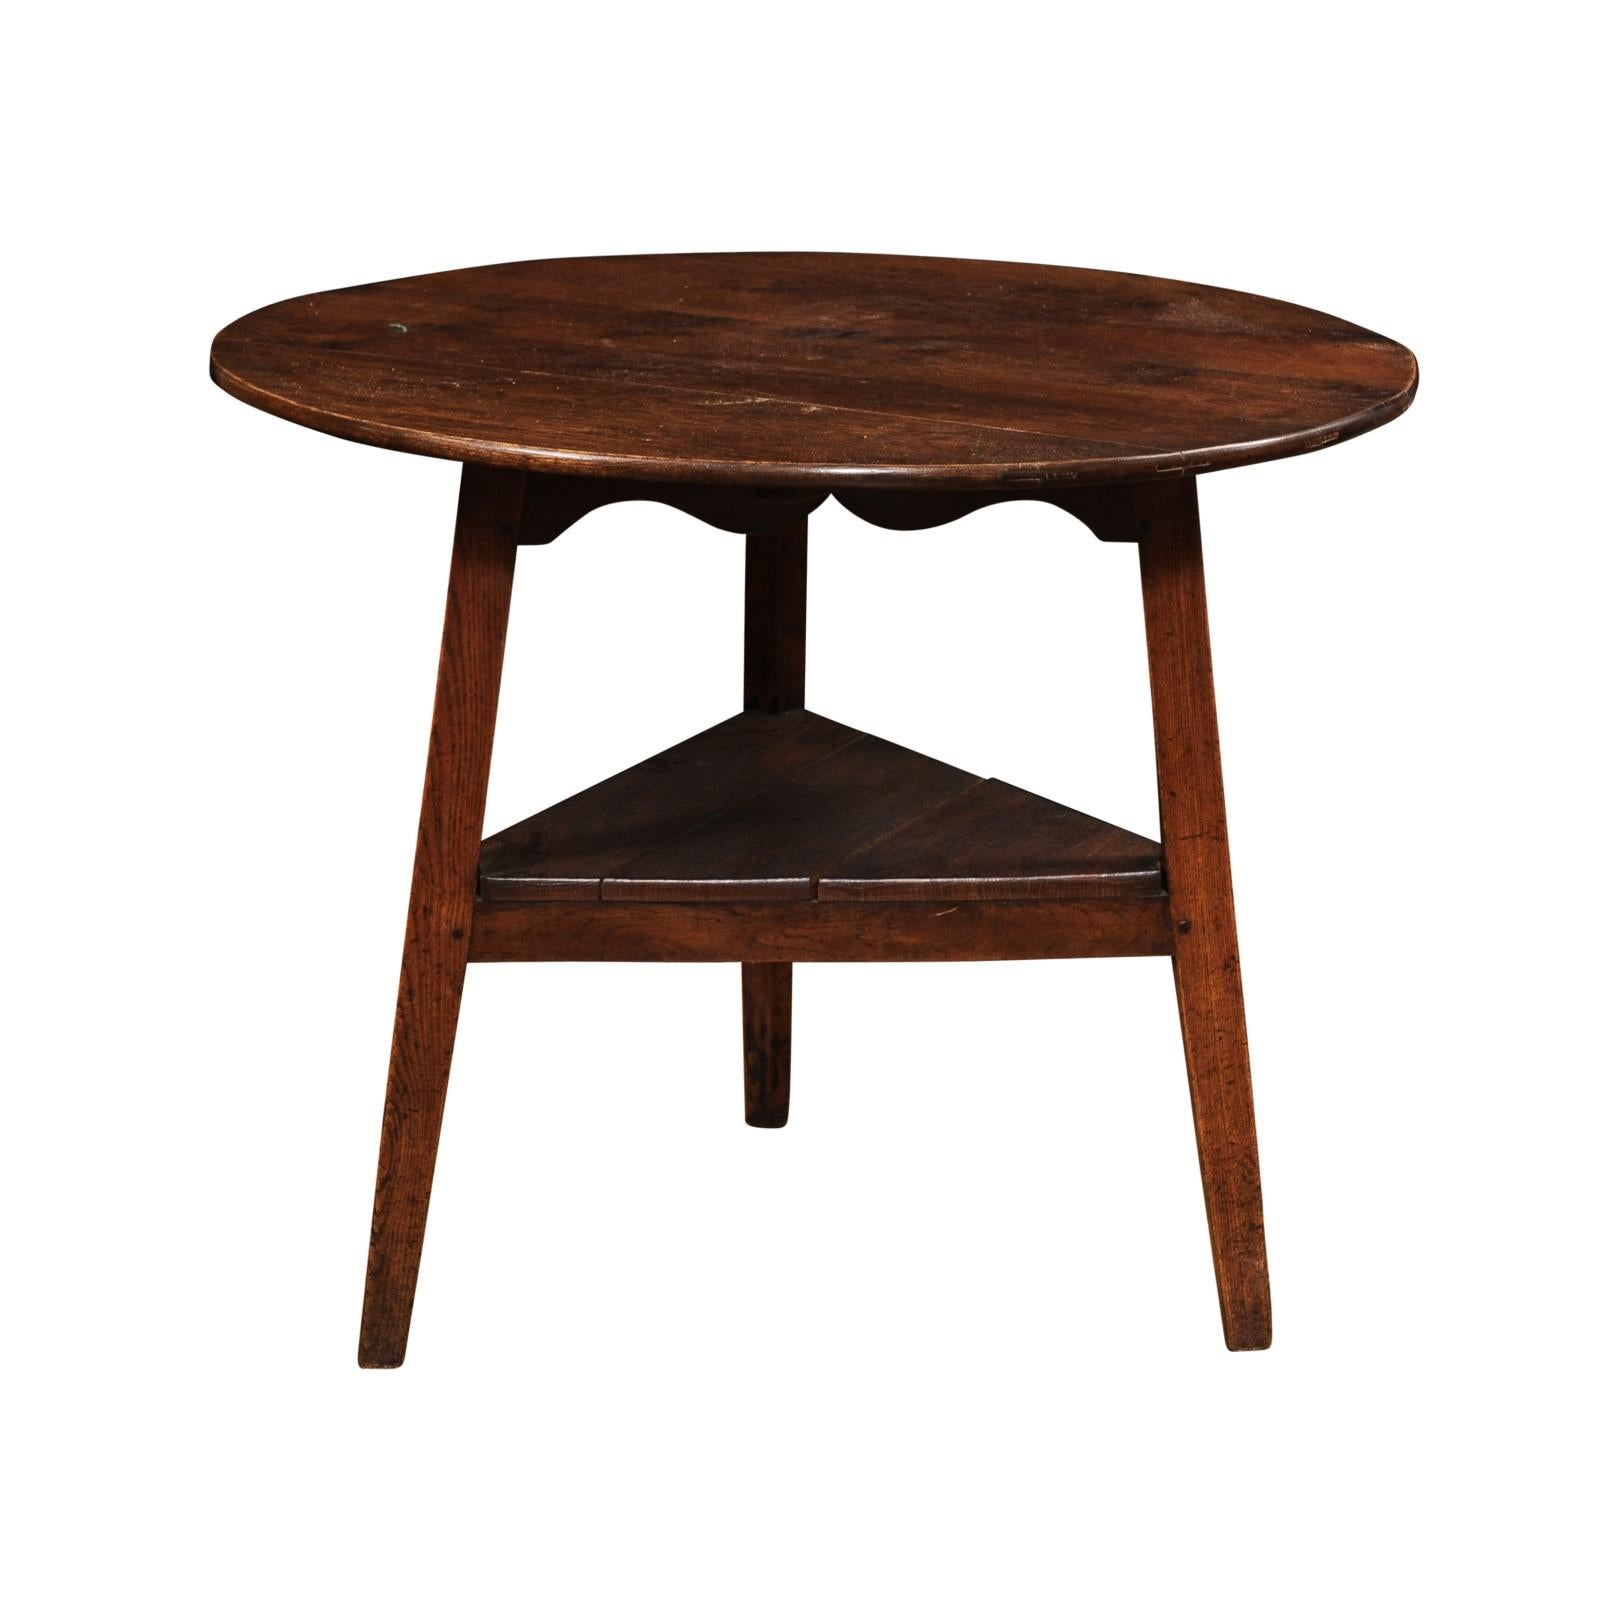 A Welsh chestnut cricket table from circa 1860 with circular top, carved scalloped apron on all sides and low triangular shelf. Immerse yourself in the timeless charm of this Welsh chestnut cricket table, hailing from circa 1860.

The table features